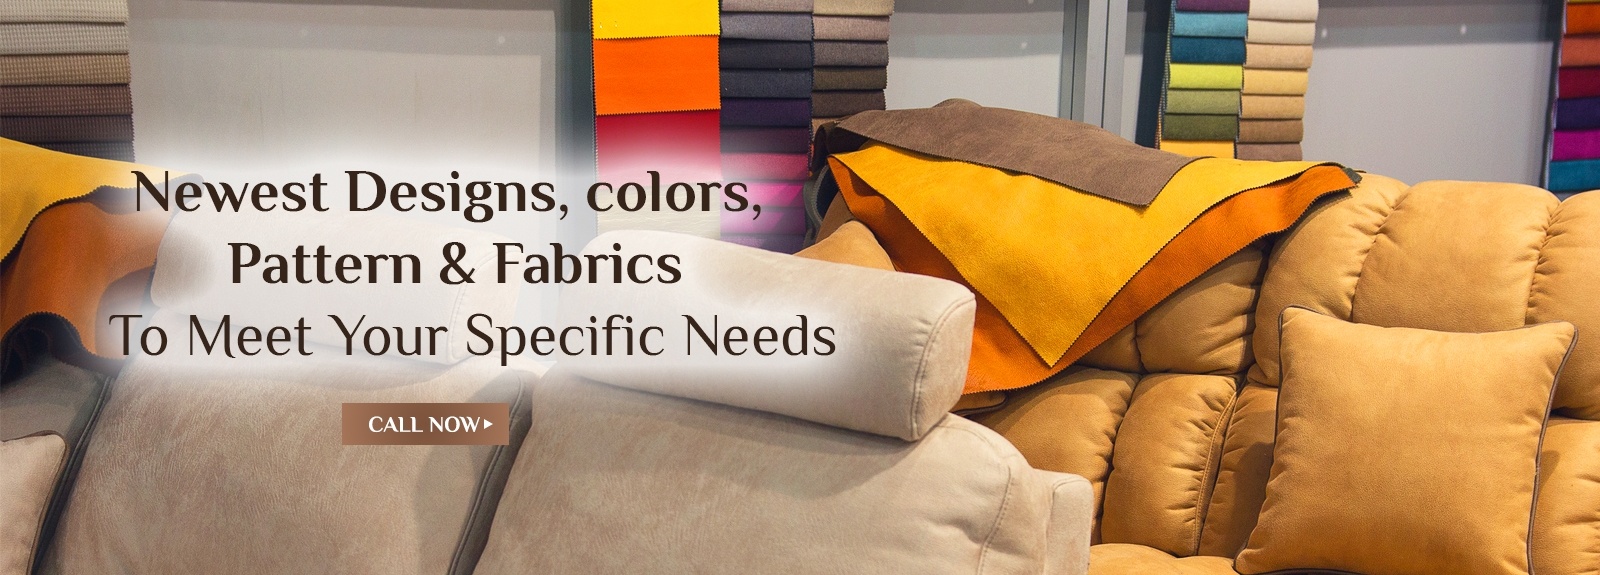 Residential Upholstery Services by Nesco Upholstery and Design